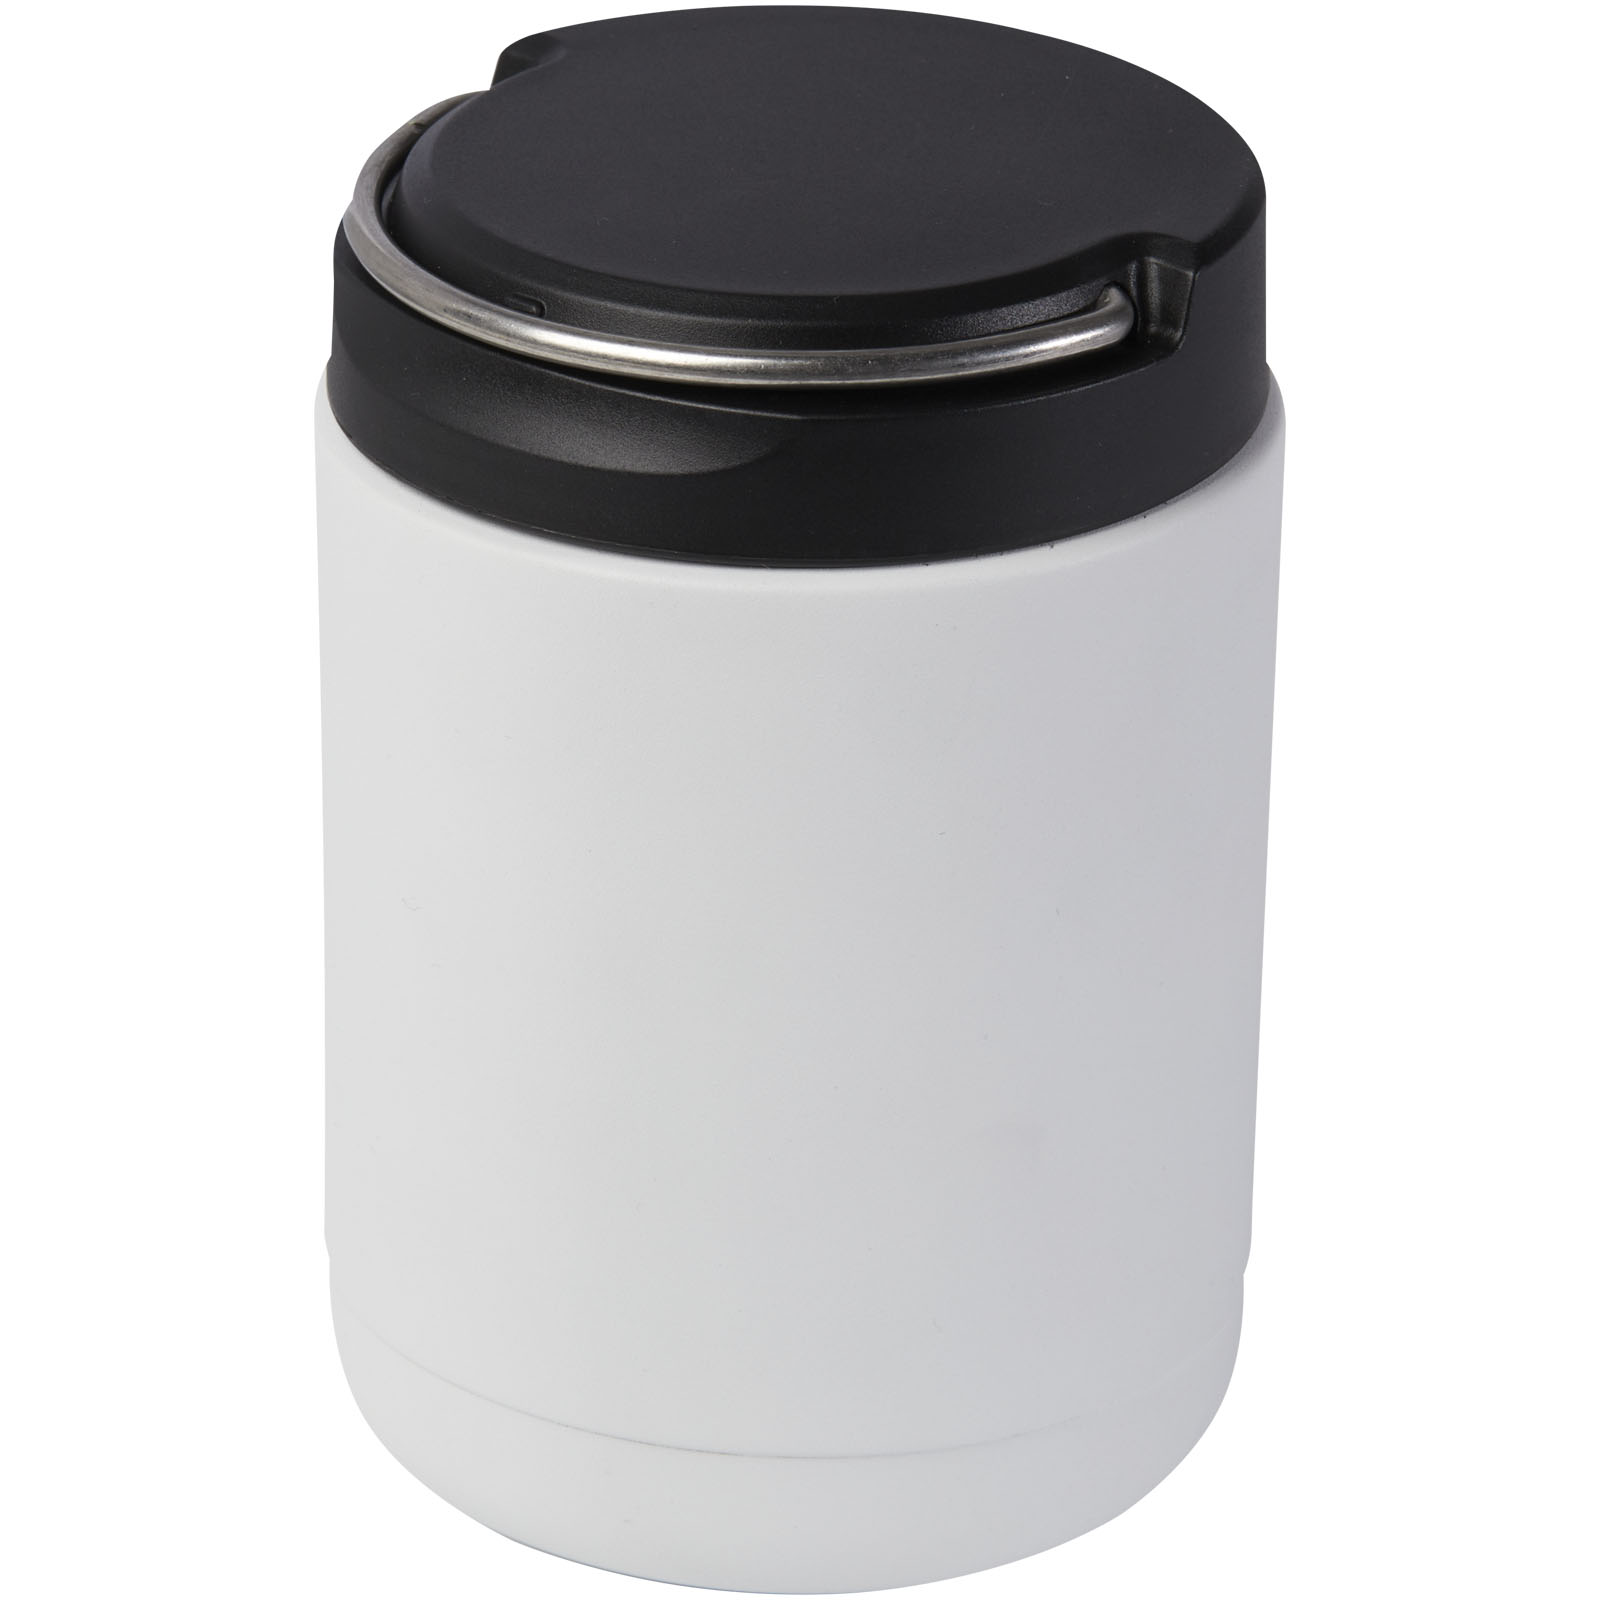 Lunch Boxes - Doveron 500 ml recycled stainless steel insulated lunch pot